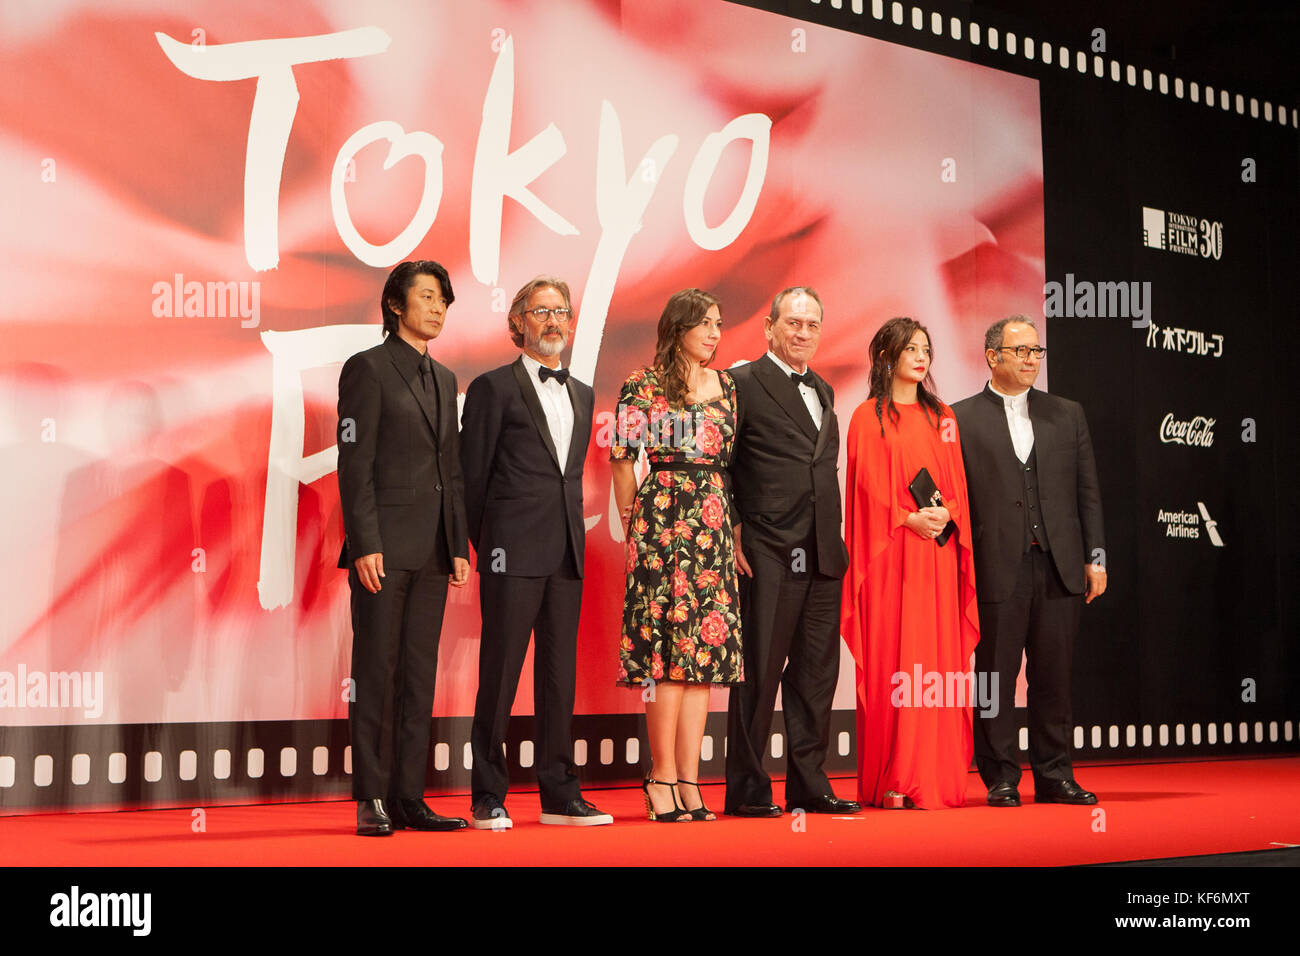 Members of the International Competition Jury, Masatoshi Nagase, Martin Provost, Victoria Jones, Tommy Lee Jones, Zhao Wei, Reza Mirkarimi appears on the opening red carpet for The 30th Tokyo International Film Festival in Roppongi on October 25th, 2017, in Tokyo, Japan. The festival runs from October 25th to November 3rd at venues in Tokyo. Credit: Michael Steinebach/AFLO/Alamy Live News Stock Photo